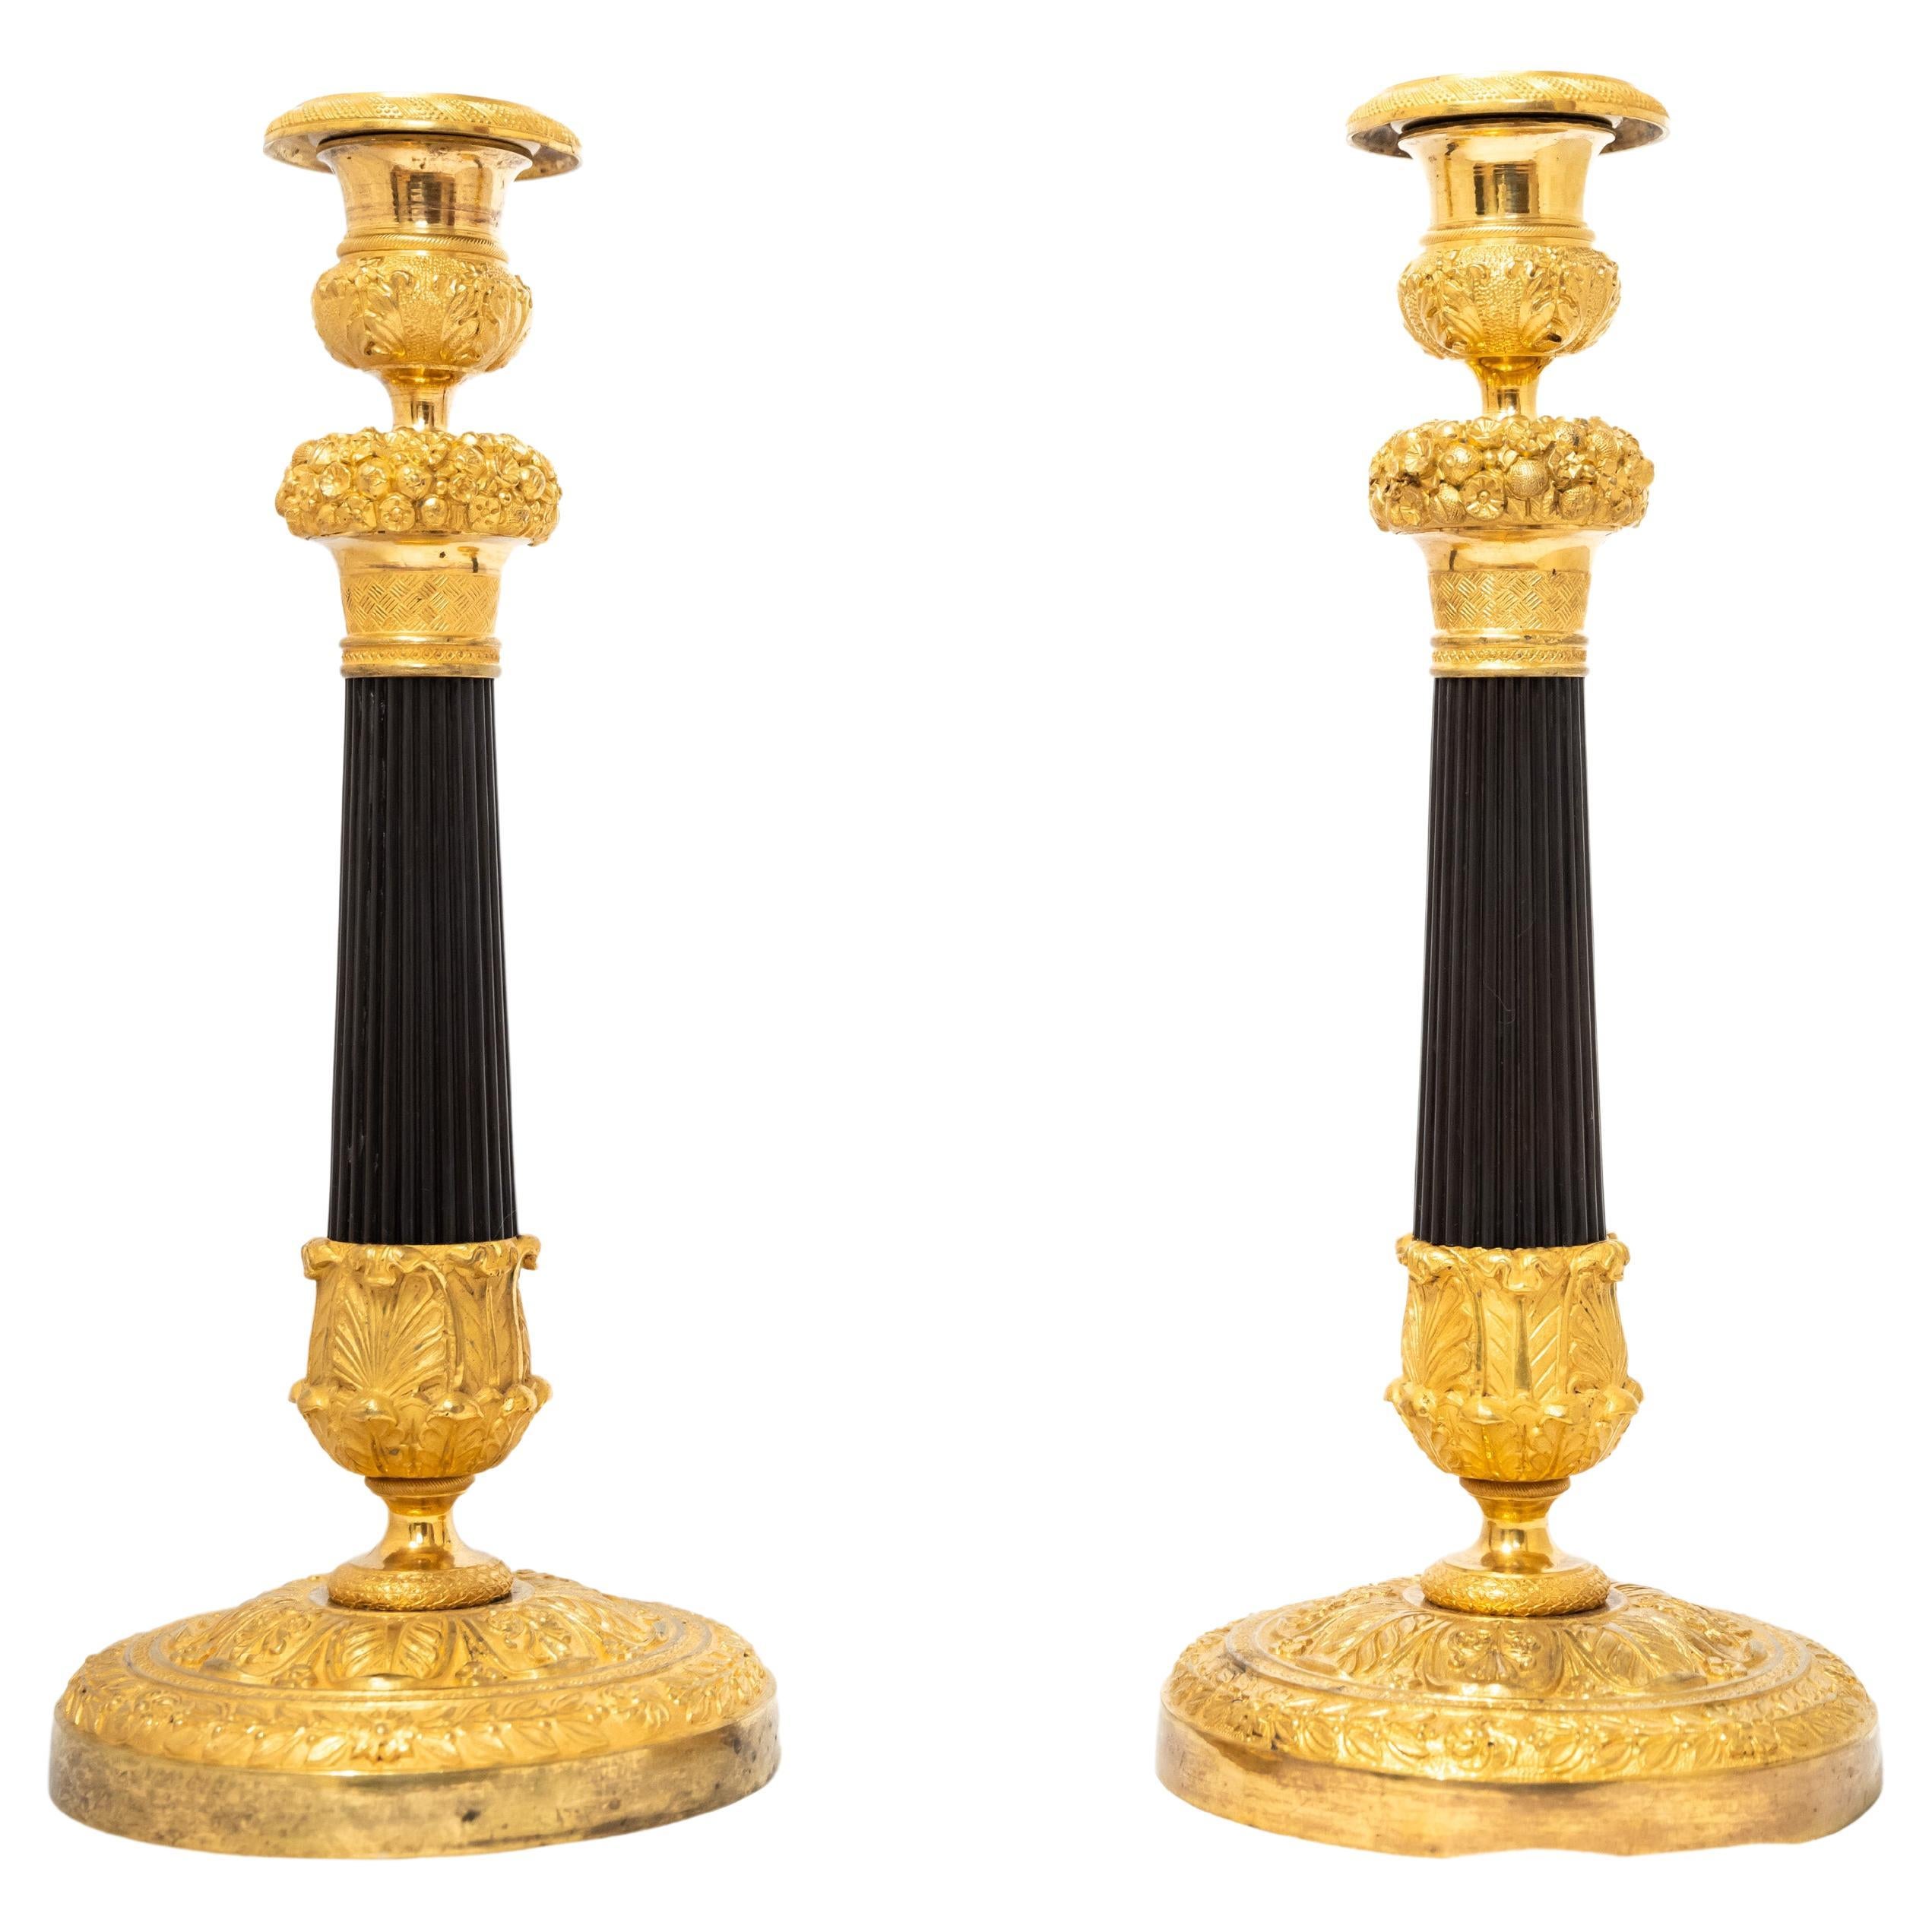 A Pair of Fire-Gilt and Patinated Bronze Candlesticks c. 1815 - 1830 For Sale